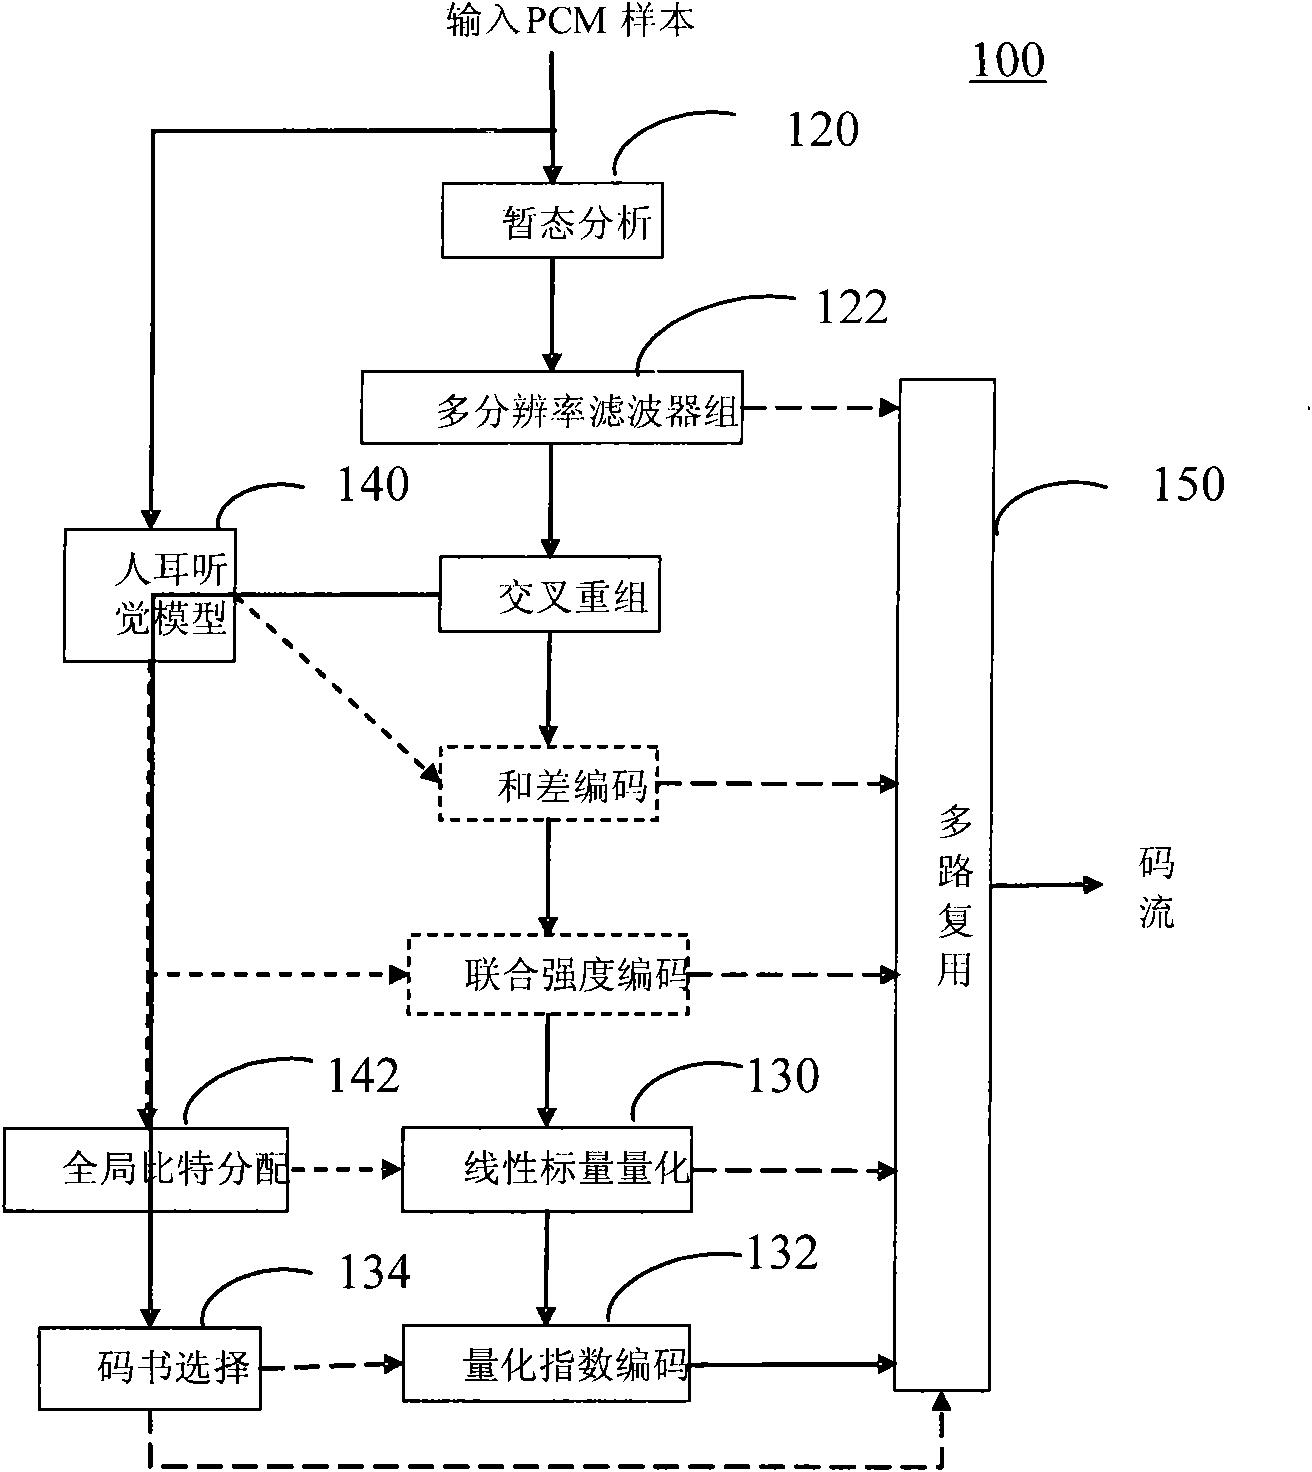 Multi-channel digital audio coding method based on DRA coder and coding system thereof